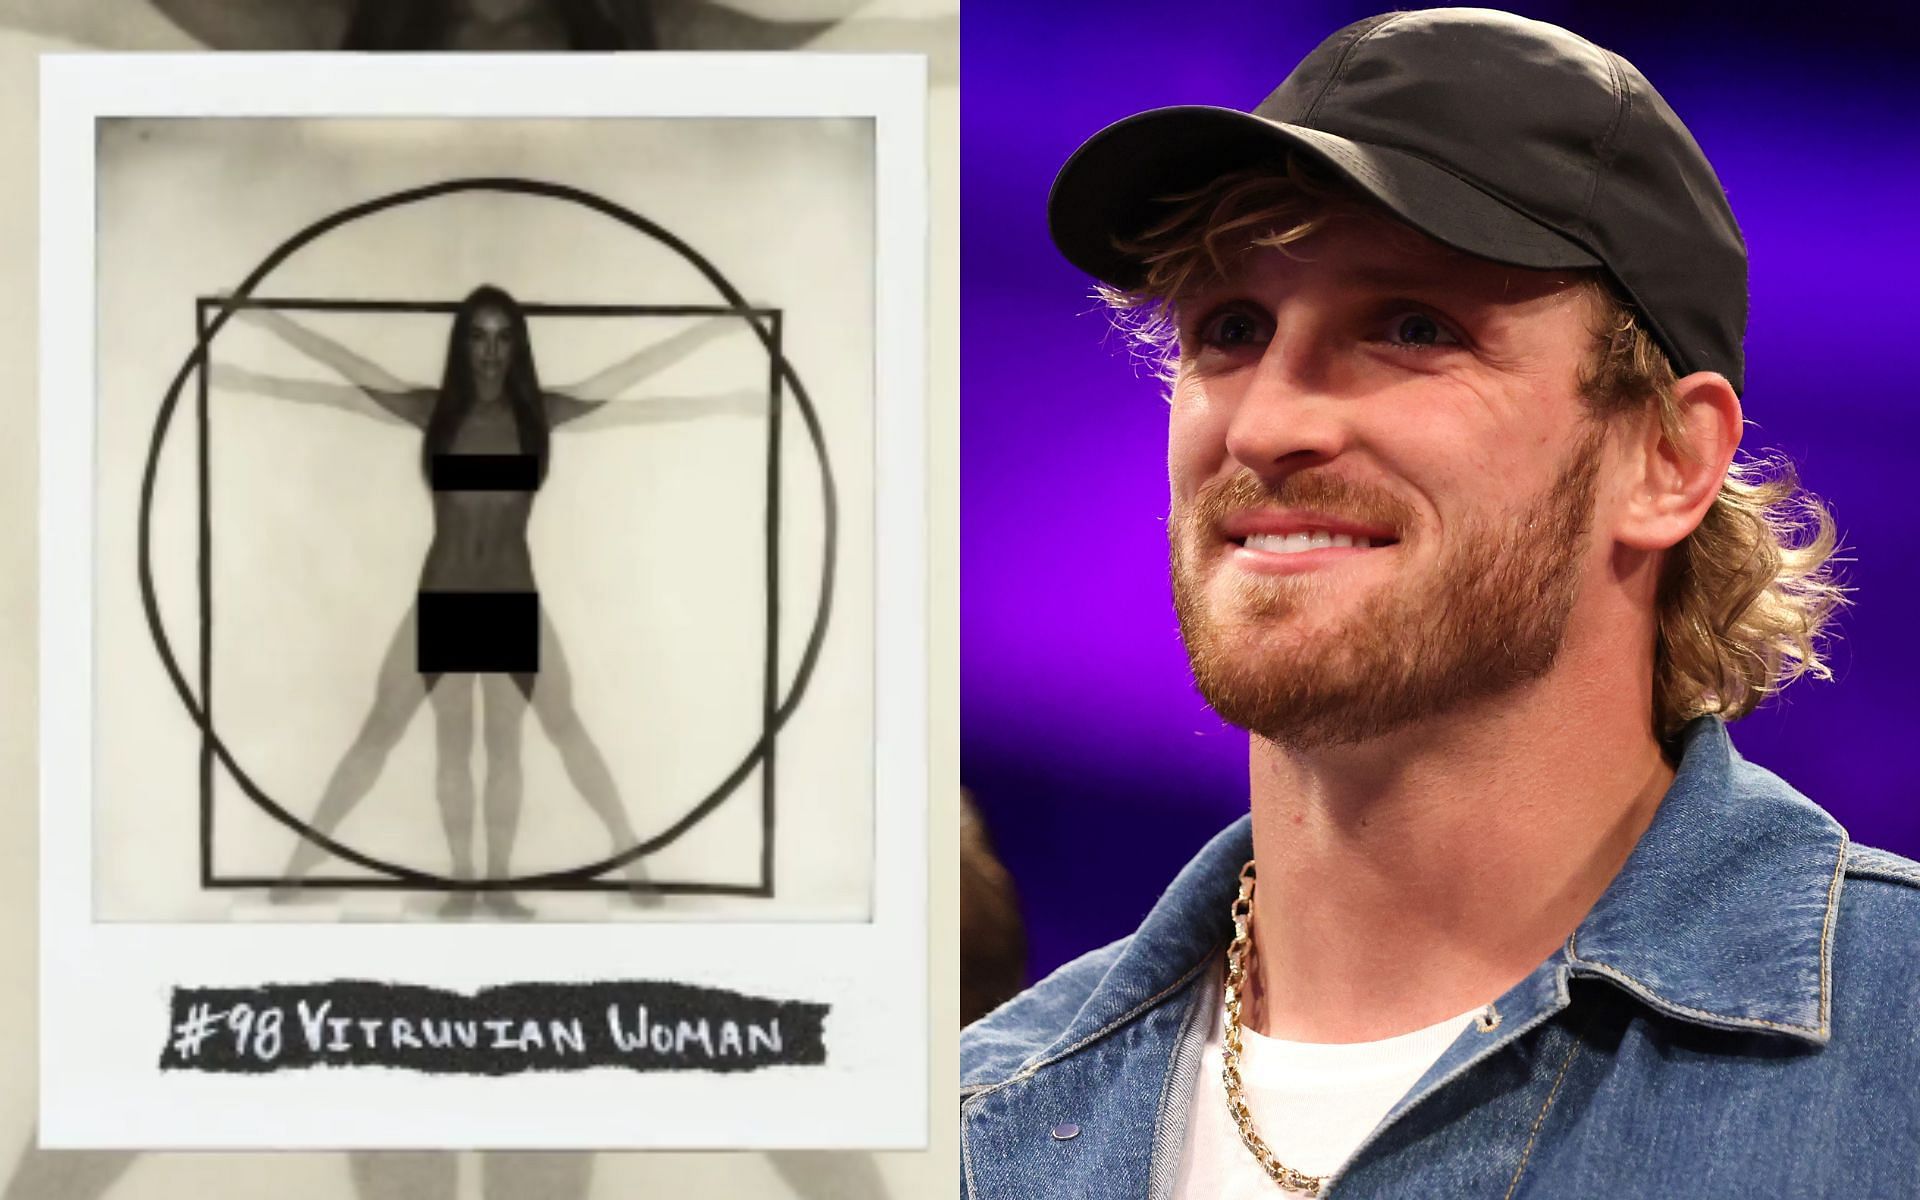 #98 The Vitruvian Woman (left) and Logan Paul (right) (Image credits Getty Images and @loganpaul on Instagram)